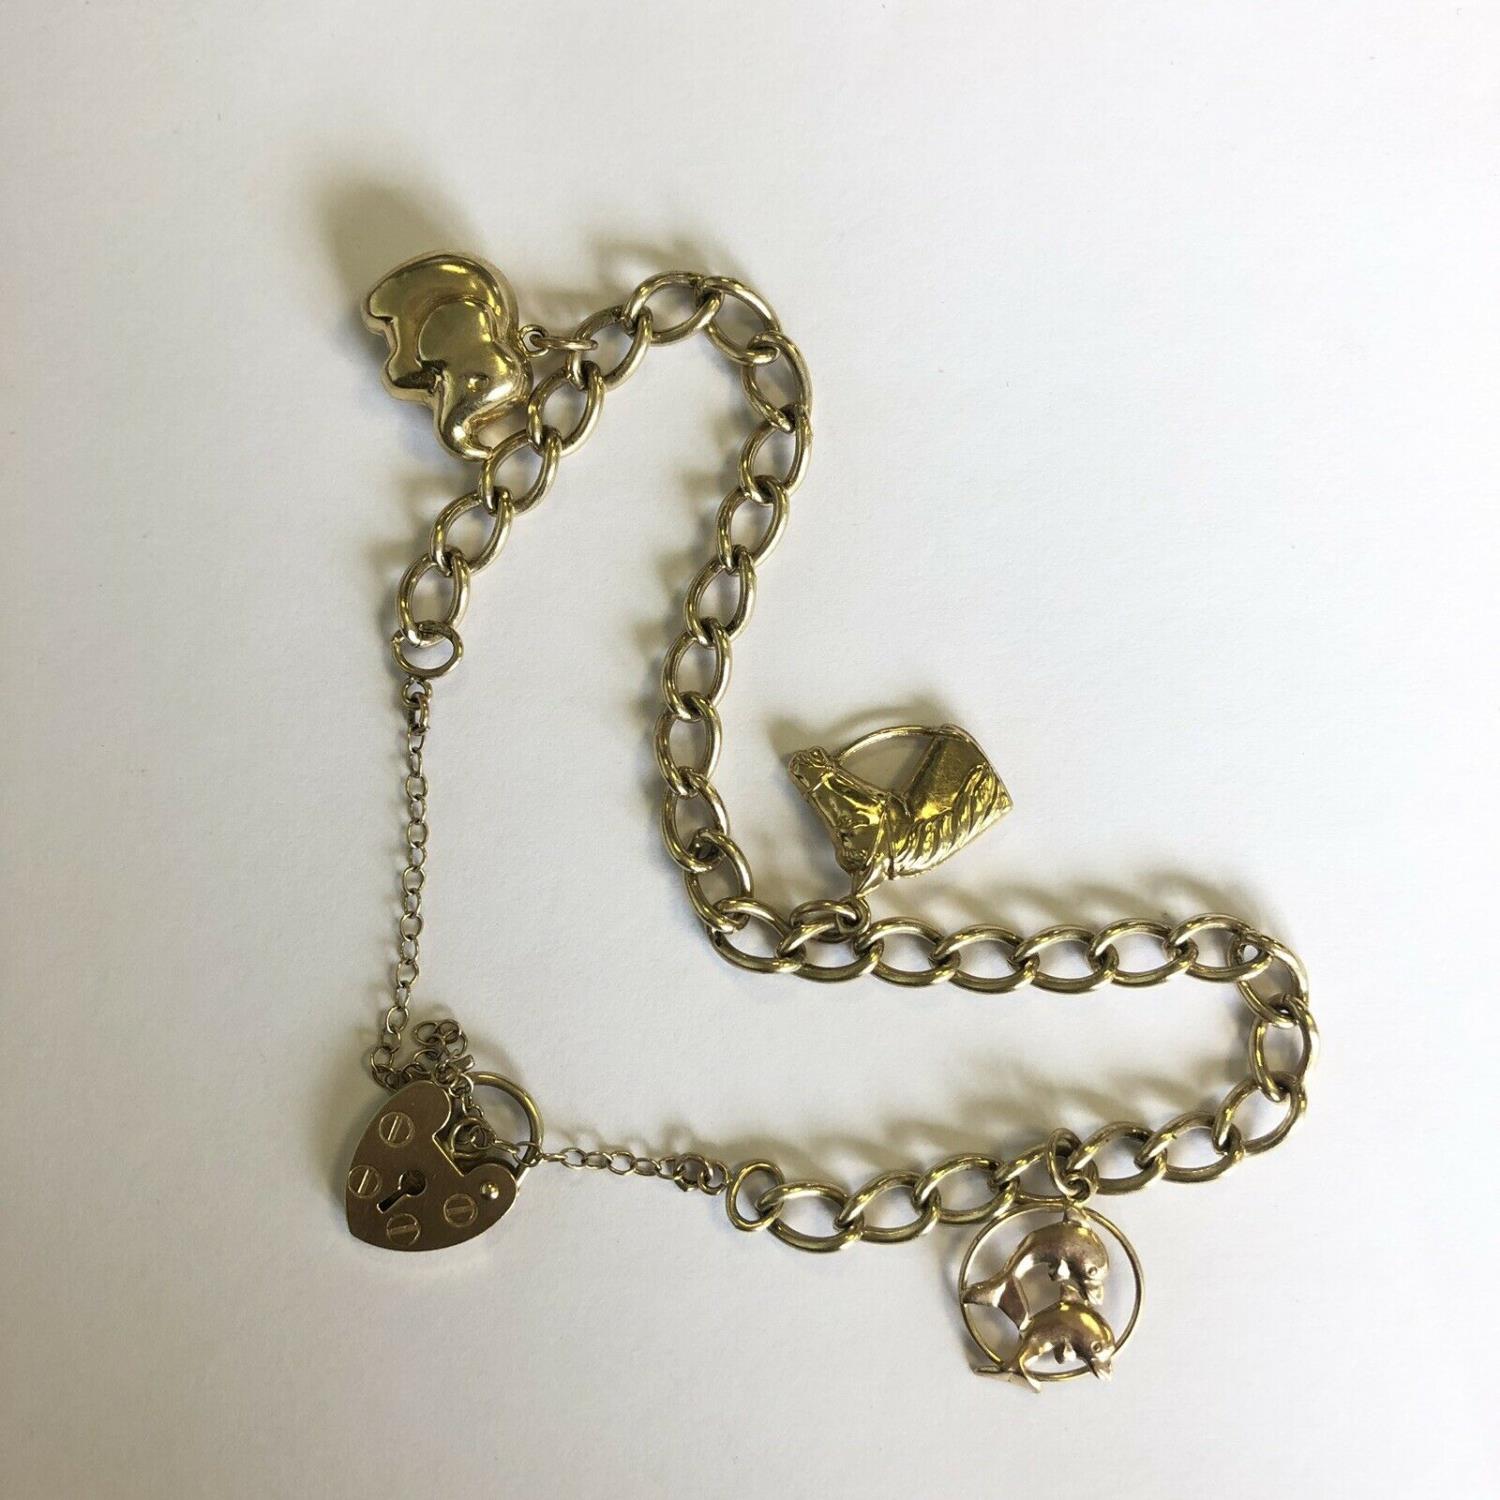 A Vintage Hallmarked 9ct Yellow Gold Charm Bracelet with padlock & 3 charms